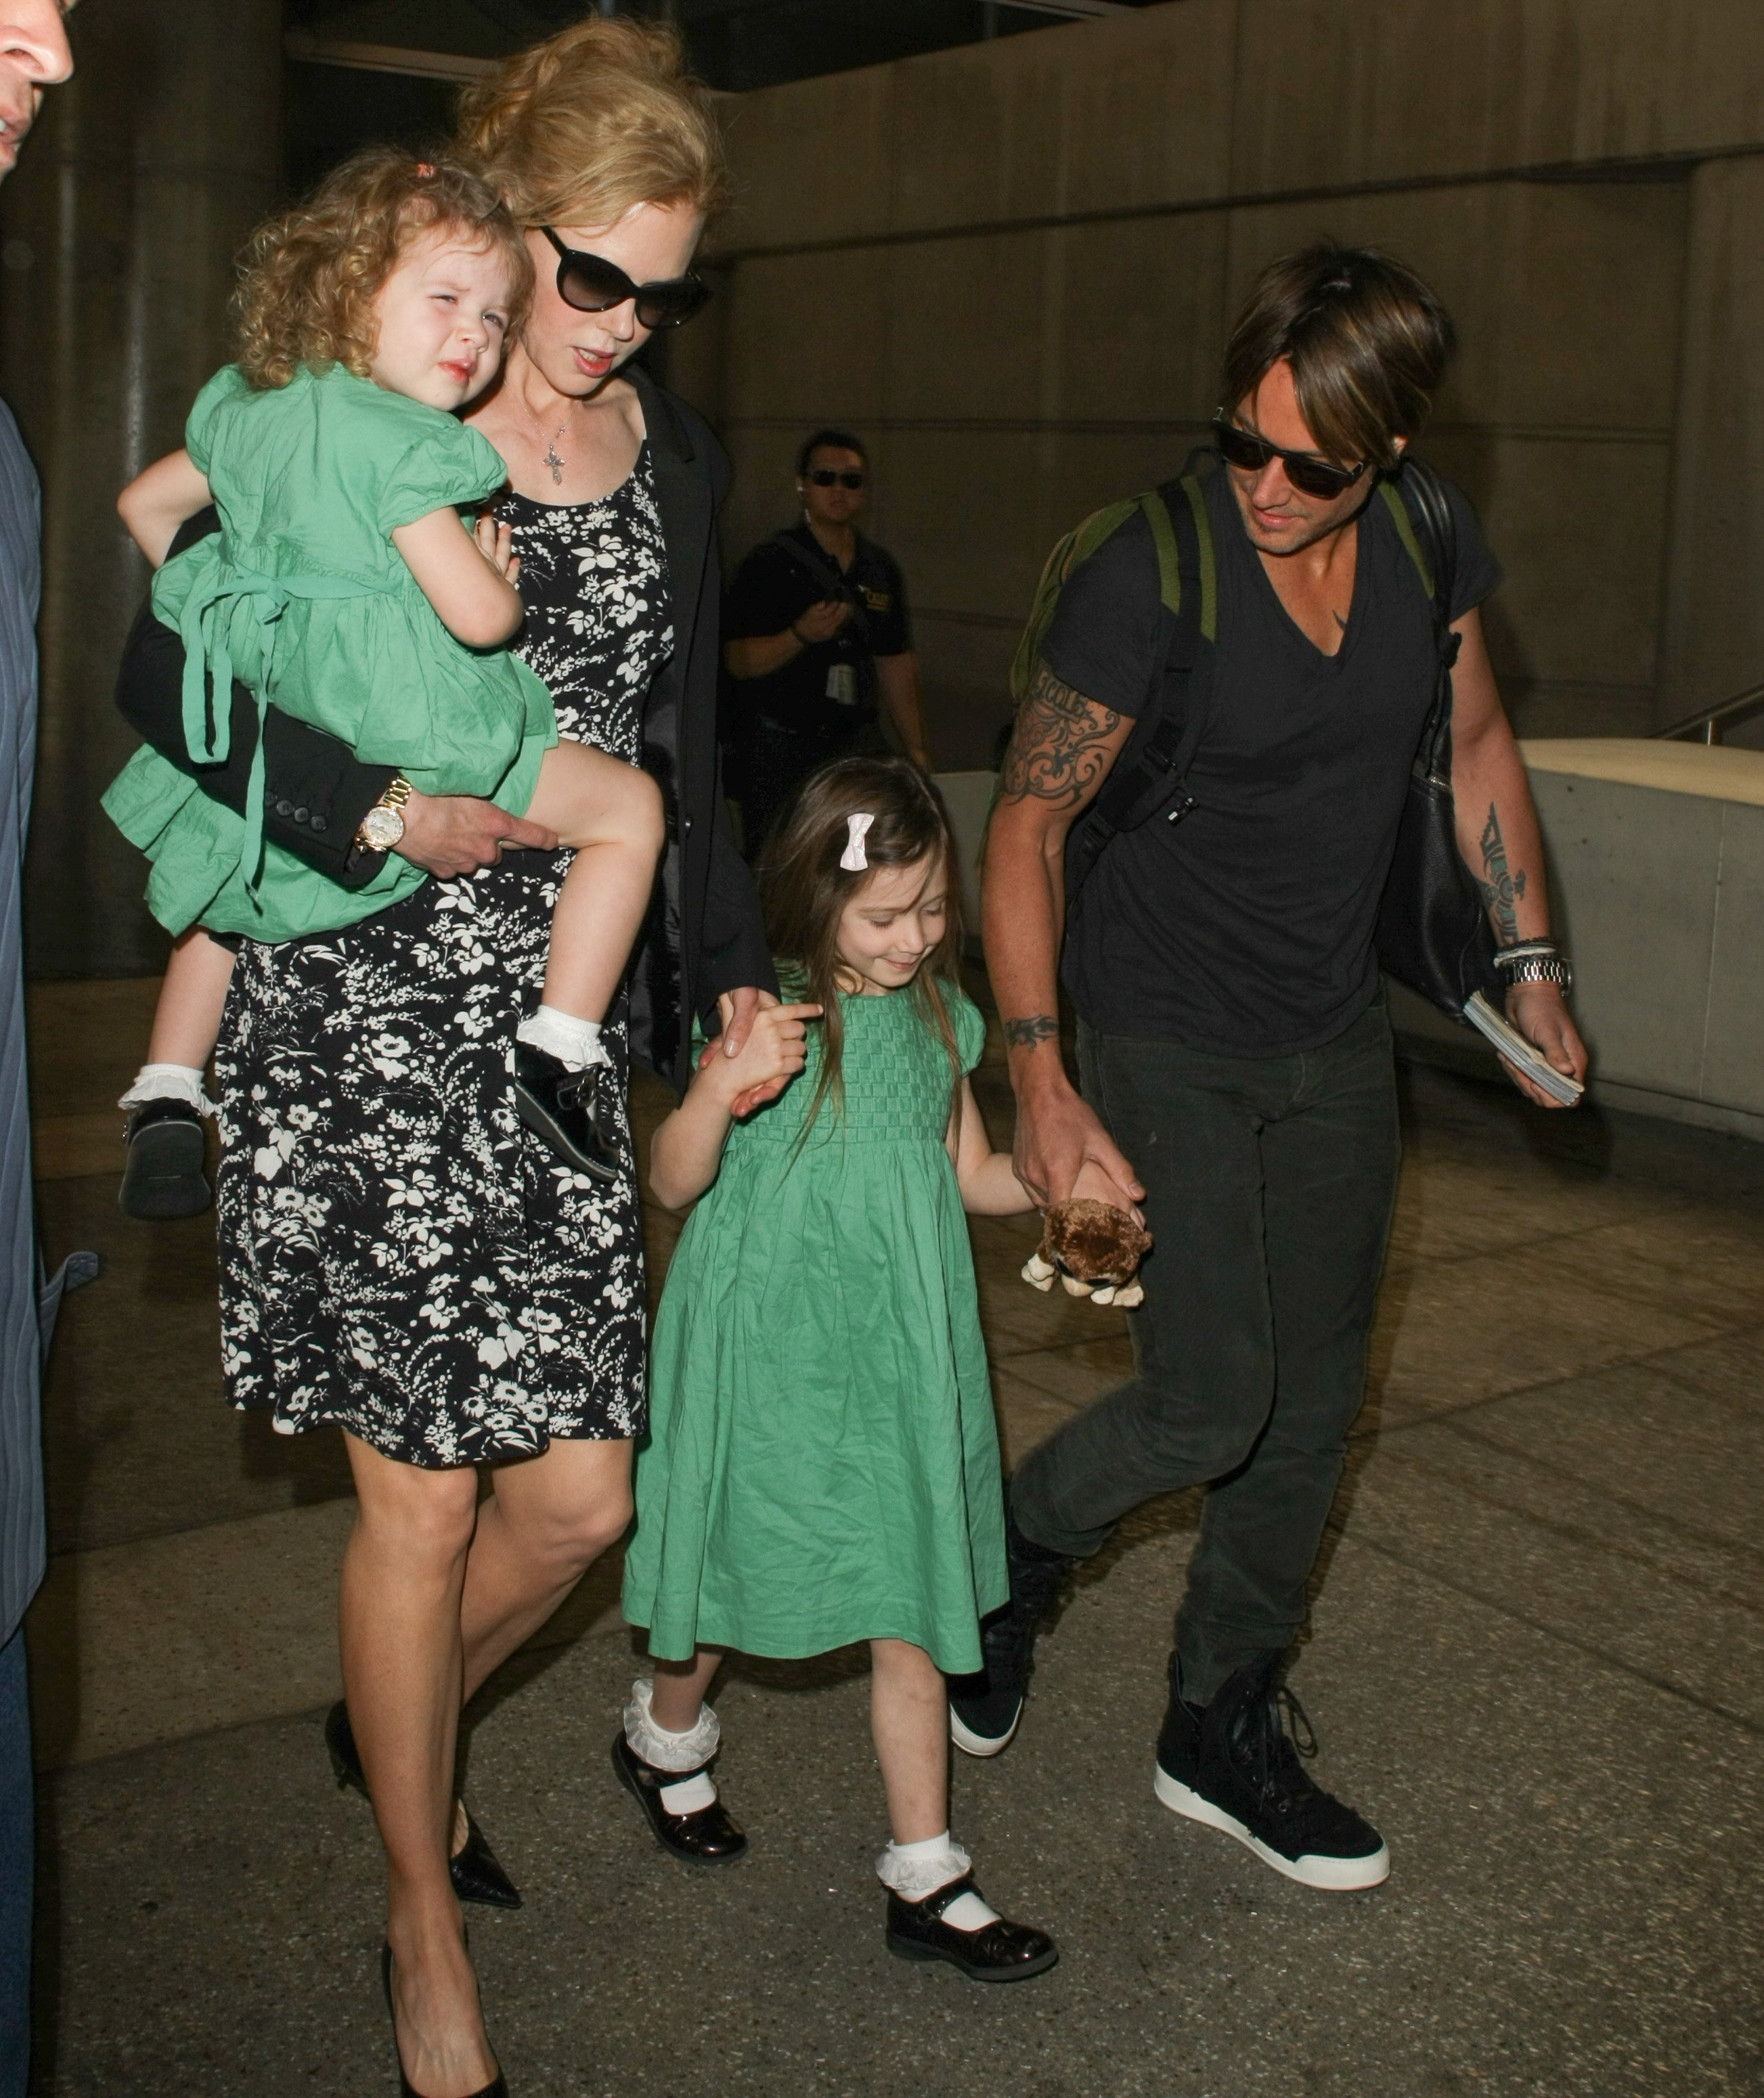 Nicole Kidman, Keith Urban and their daughters, Sunday Rose Kidman Urban and Faith Margaret Kidman Urban are seen at LAX airport on January 02, 2014 in Los Angeles, California | Source: Getty Images 